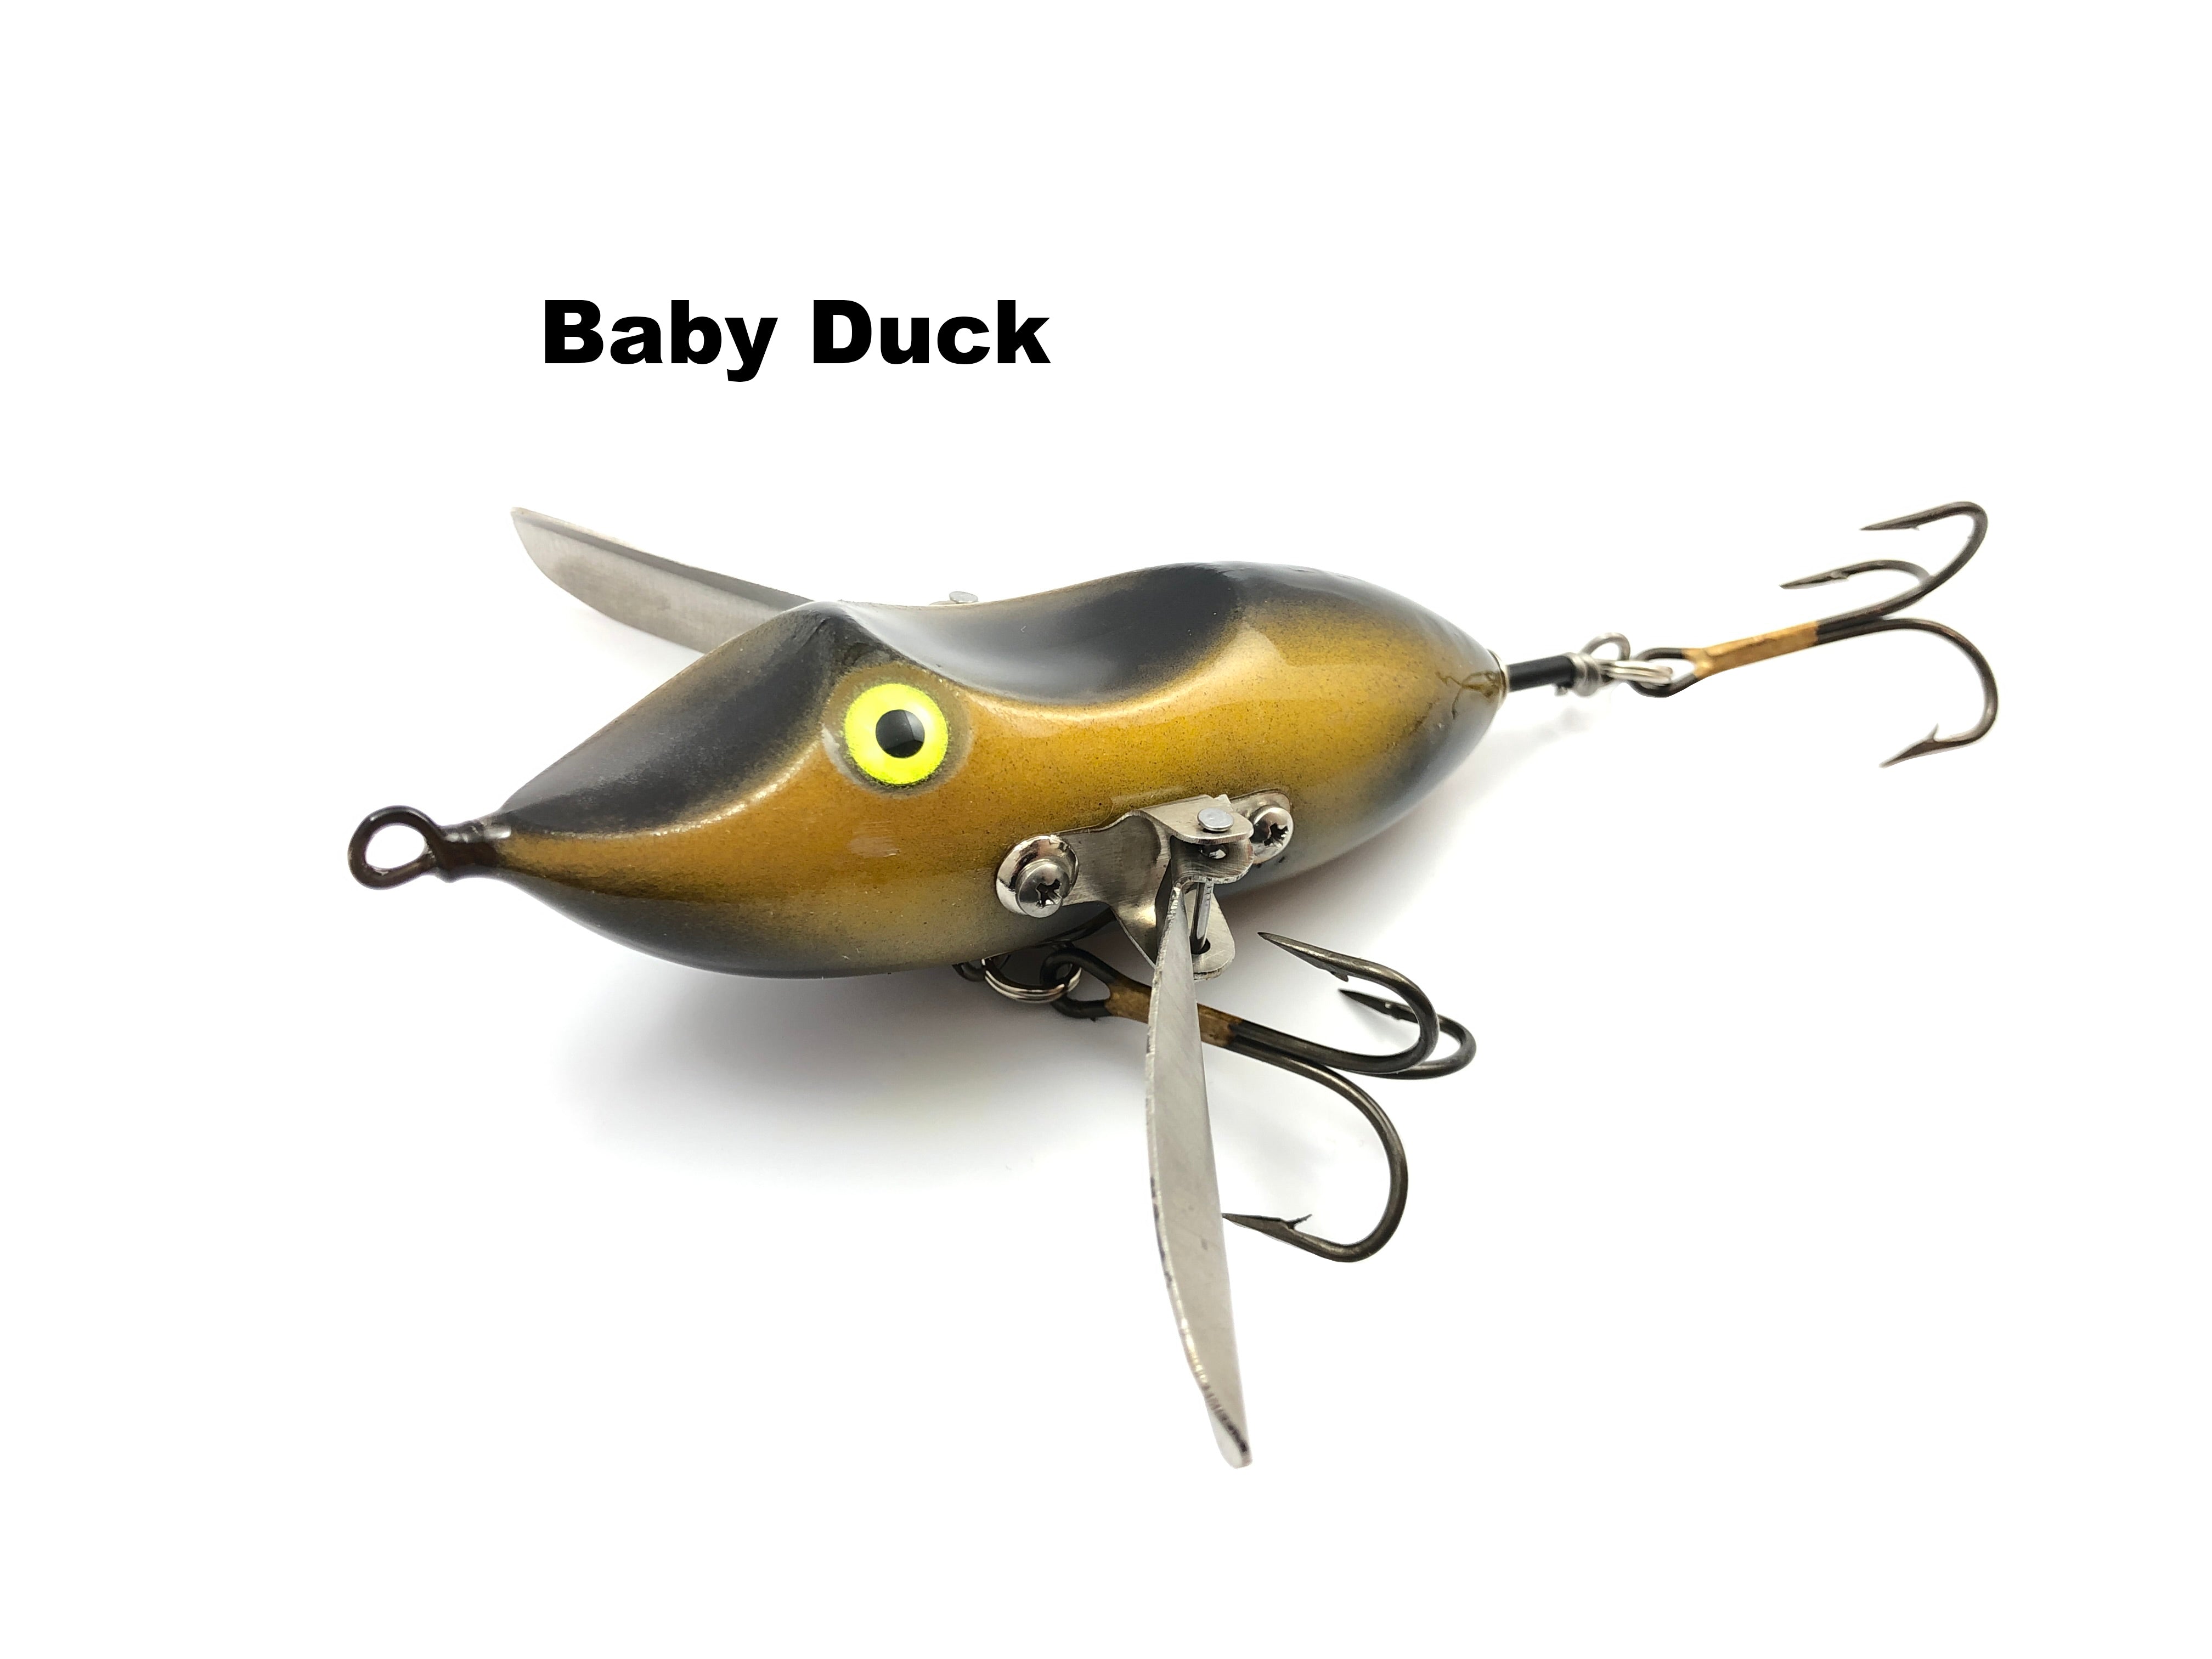 Products – tagged Bitten Tackle Musky Lure – Team Rhino Outdoors LLC